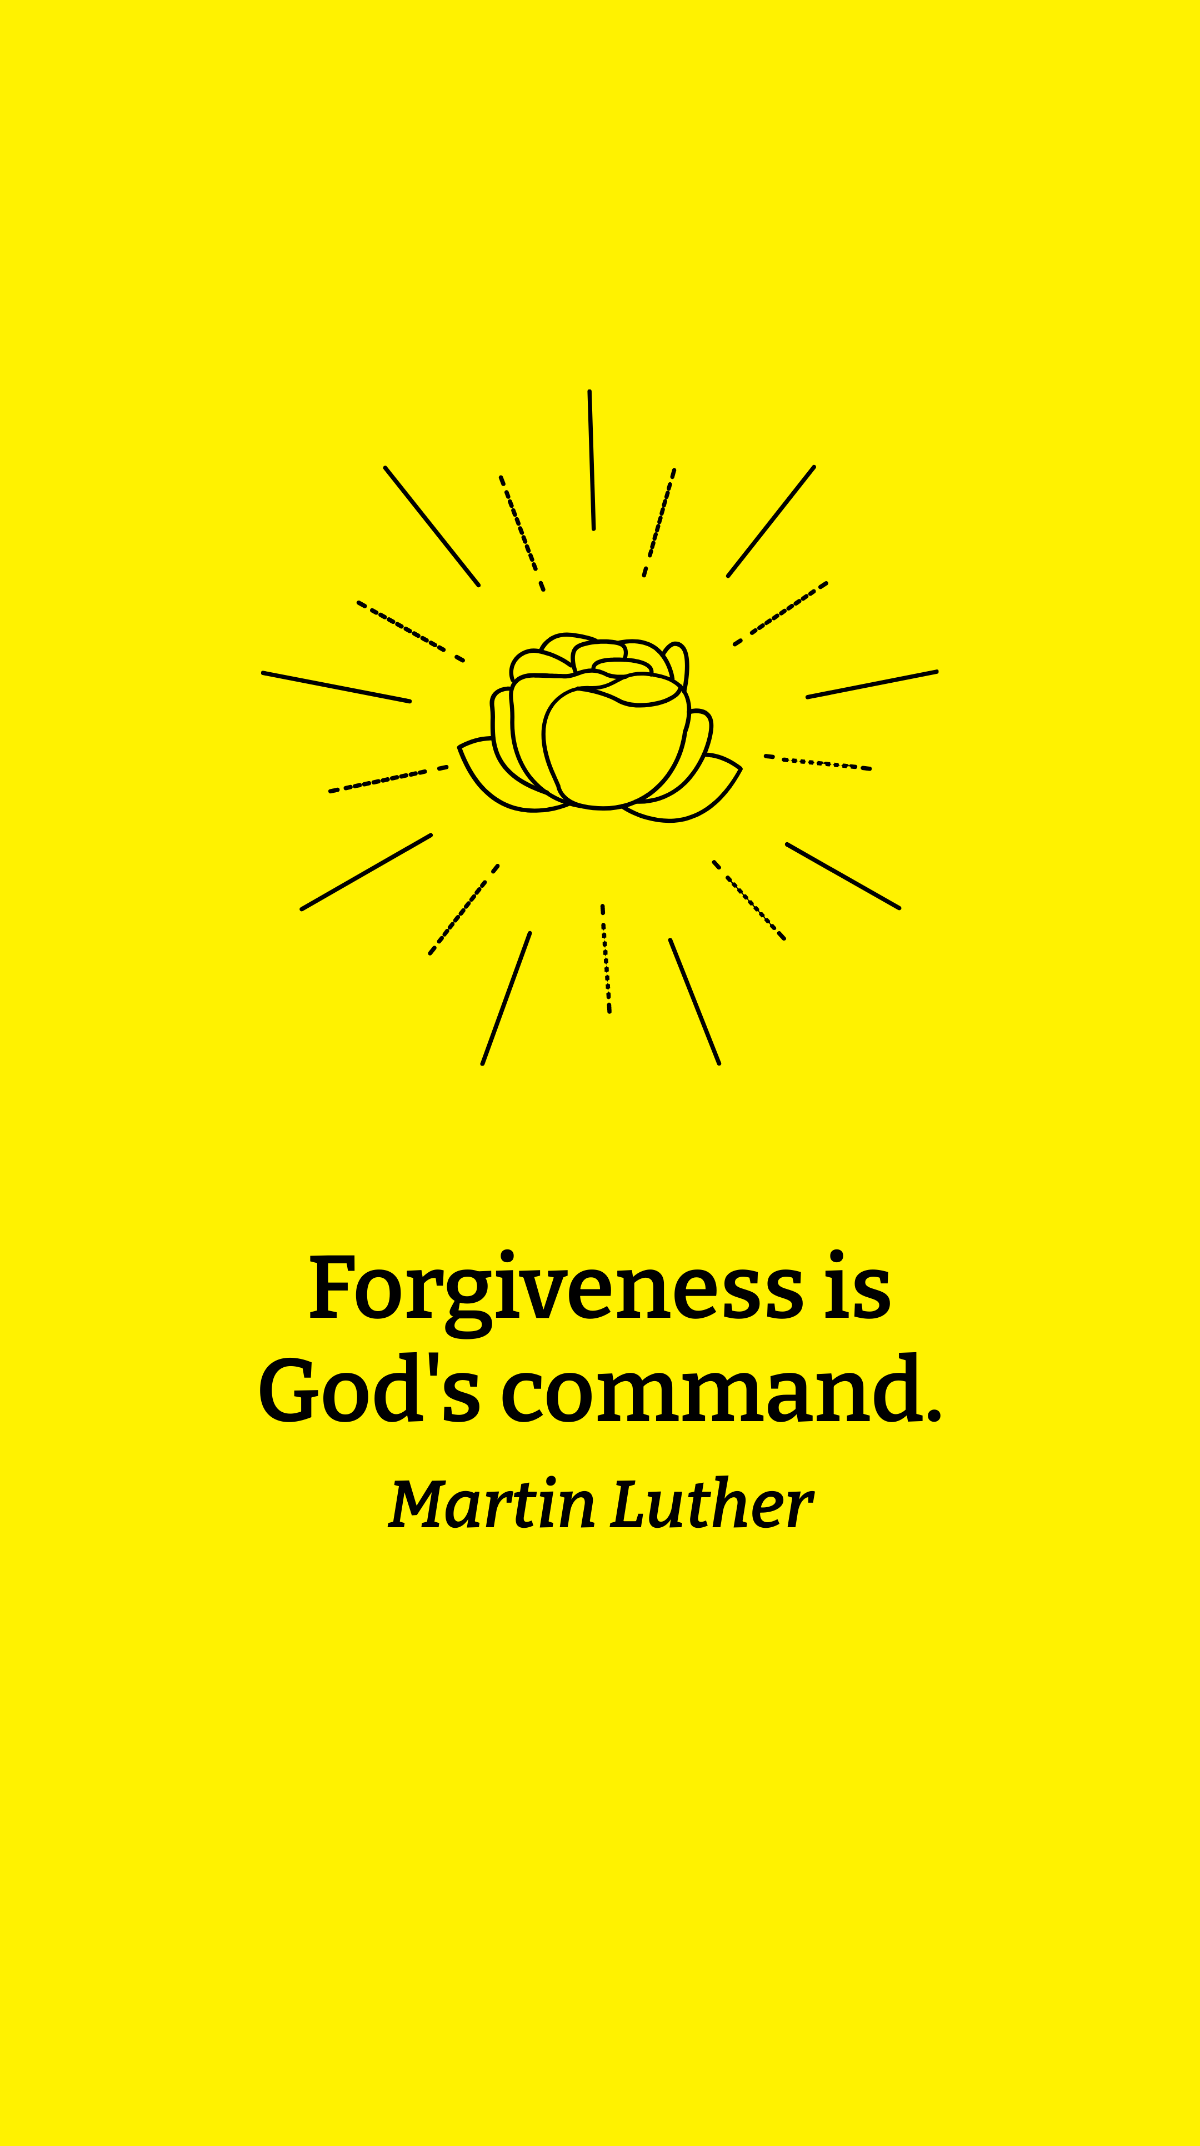 Martin Luther - Forgiveness is God's command.